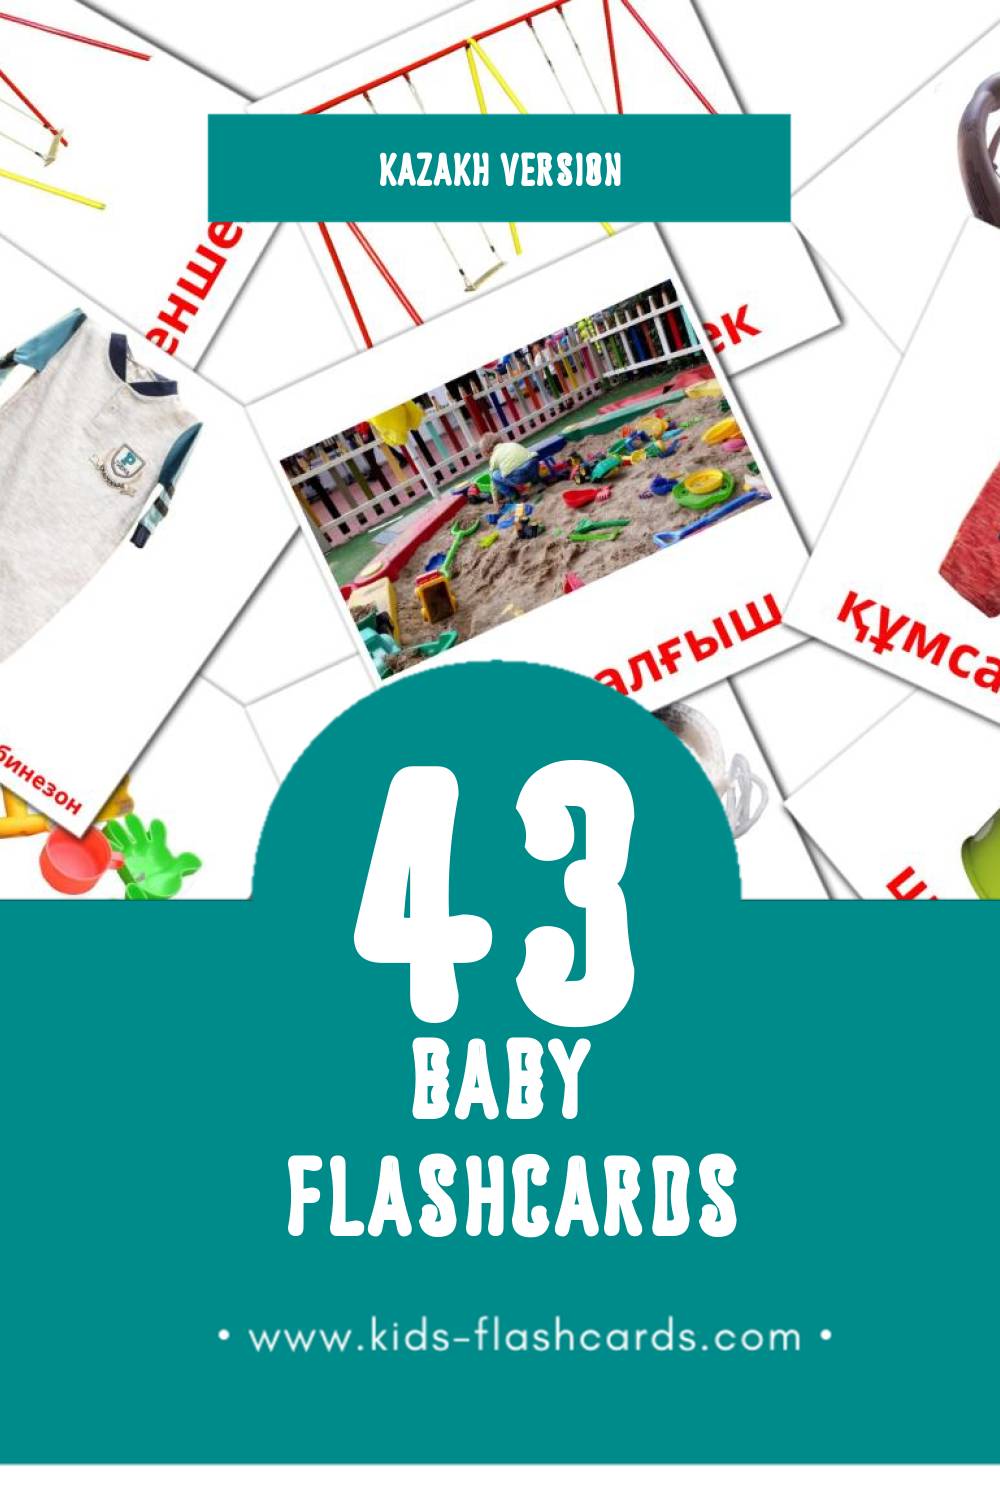 Visual Бала Flashcards for Toddlers (45 cards in Kazakh)